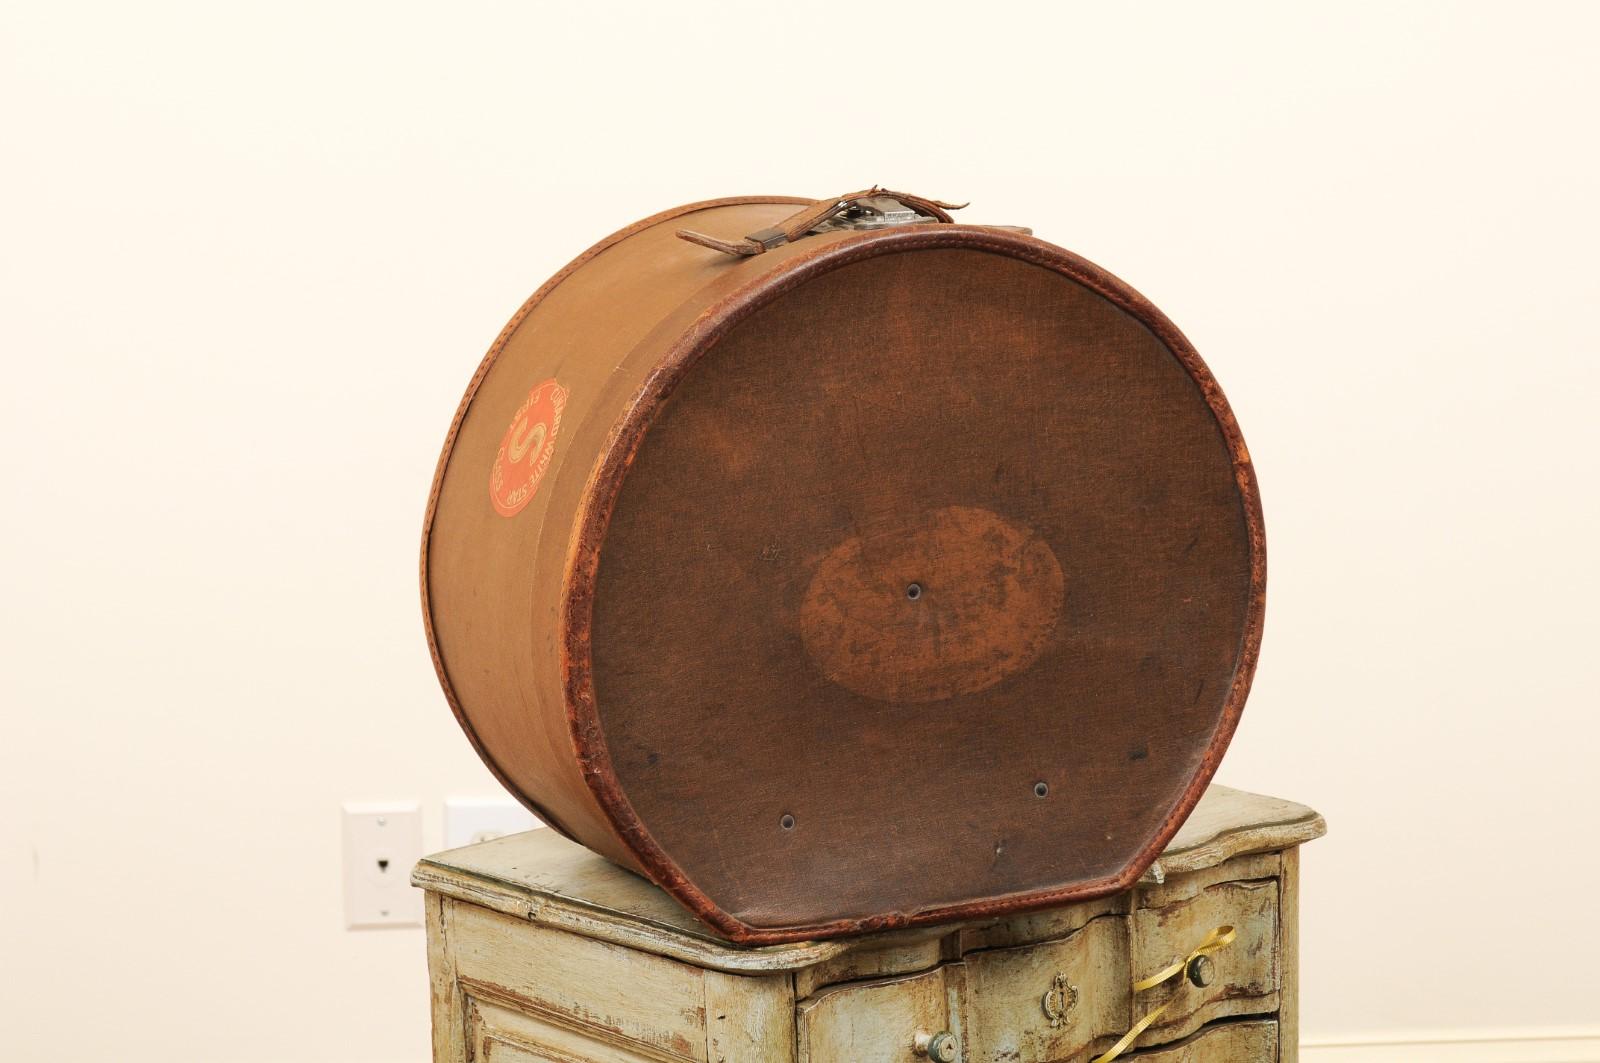 An English Victorian period leather hat box from the mid-19th century, with first class sticker. Created in England during the reign of Queen Victoria, this leather hat box features a circular shape with a leather handle in the front and showcases a